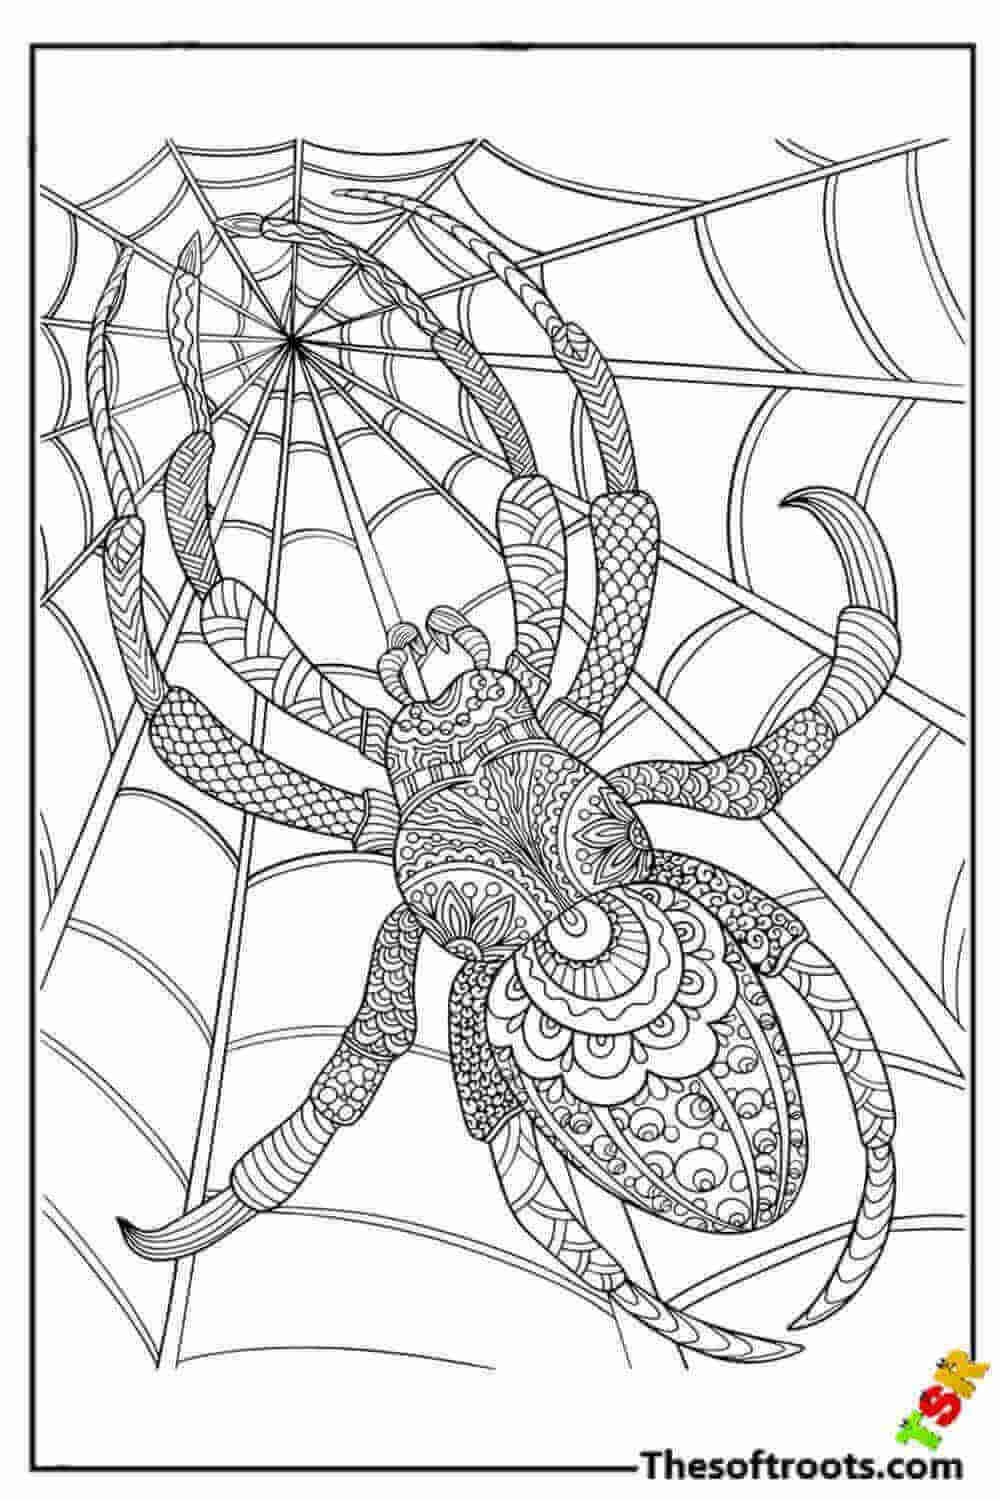 Adult Spider coloring pages